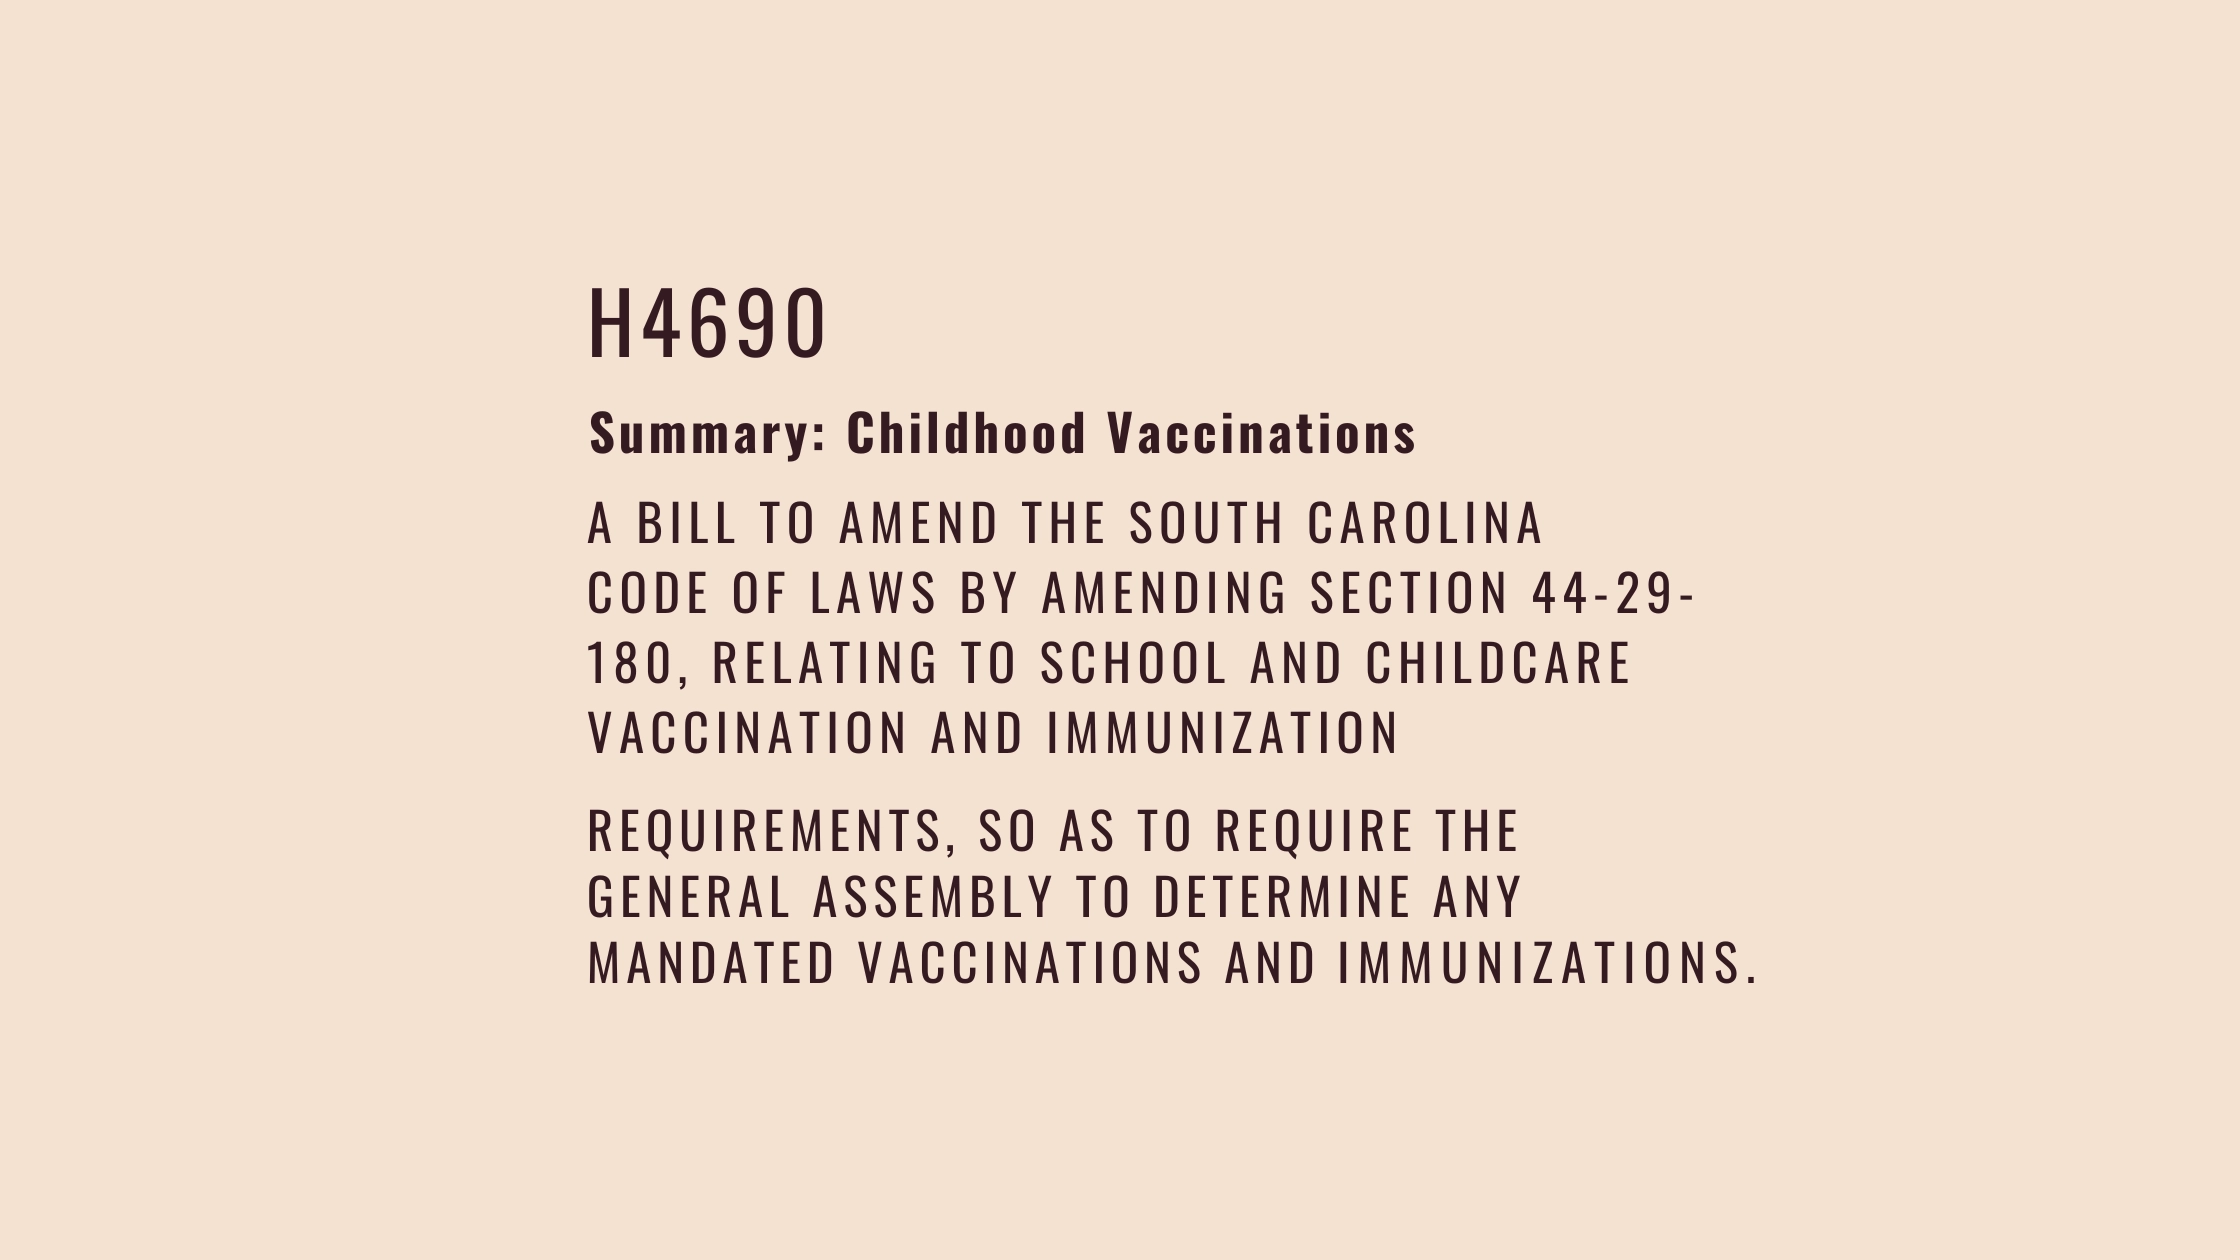 Shifting the Power: The Implications of South Carolina's H4690 on Vaccine Mandates and Parental Rights